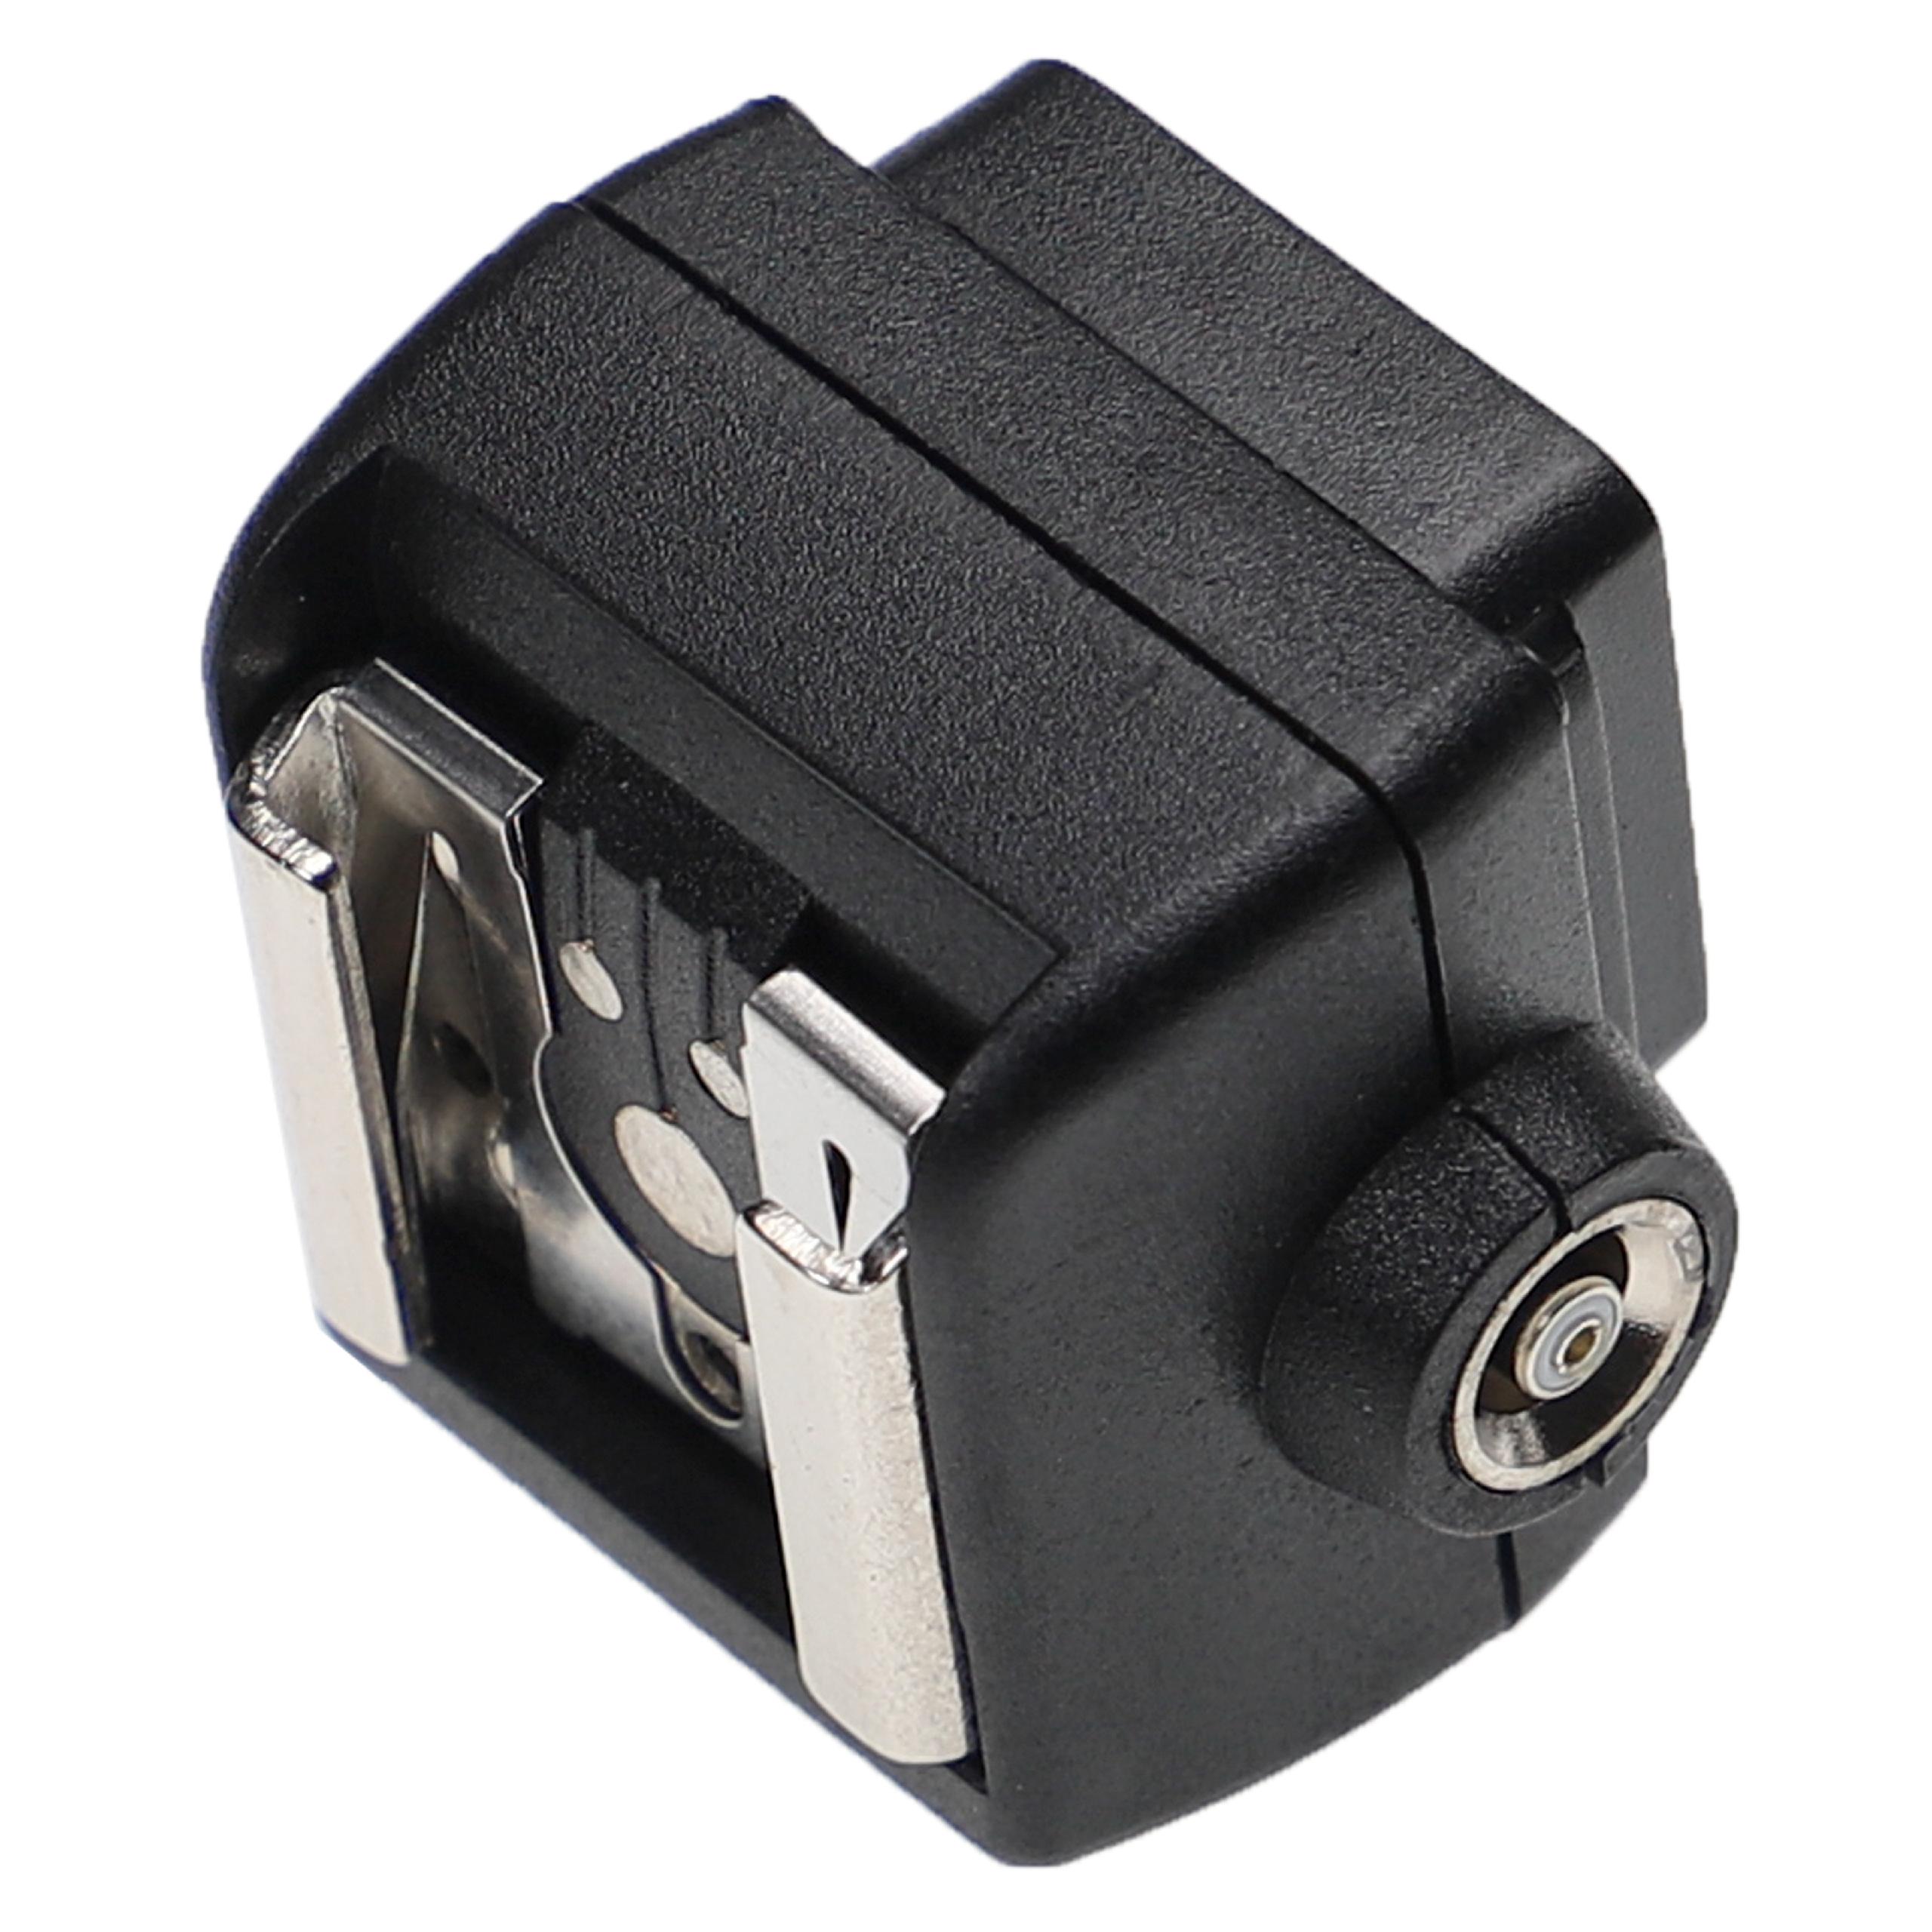 Hot Shoe Adapter for Pentax / Nikon / Sony / Canon / Olympus AF540FGZ Camera etc. - Flash Adapter